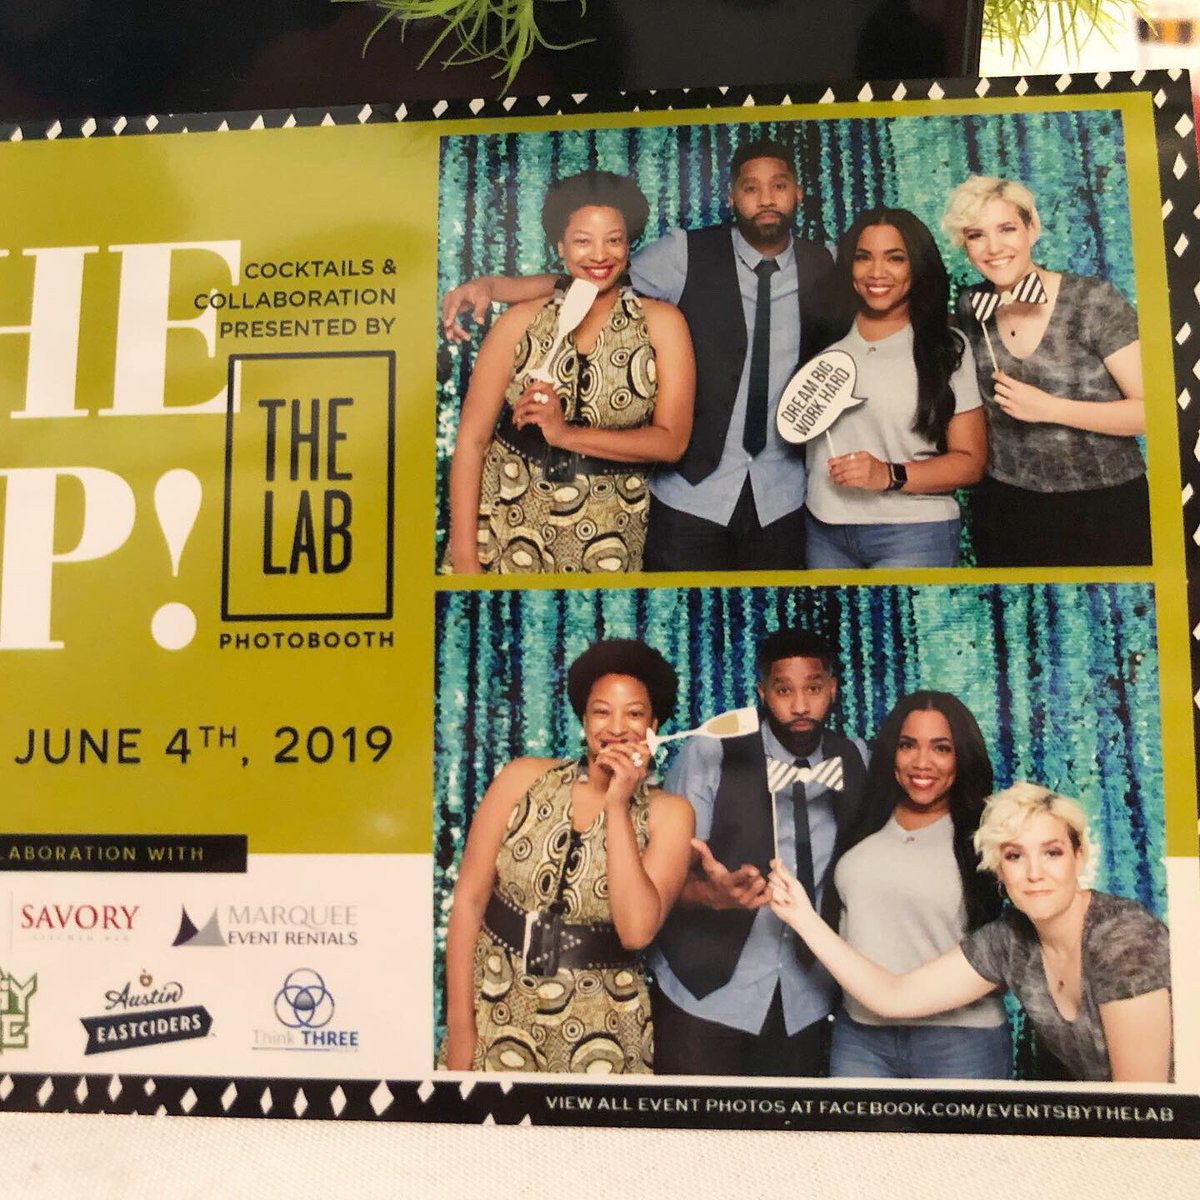 Blessed to keep #goodcompany around me at all times. Great turnout @theleahfrazier @labphotobooth! 👏🏽💯 #TheSip #BBRow #dallasentrepreneurs 

Cc: @CraigJamalLewis @raedchang 🤗